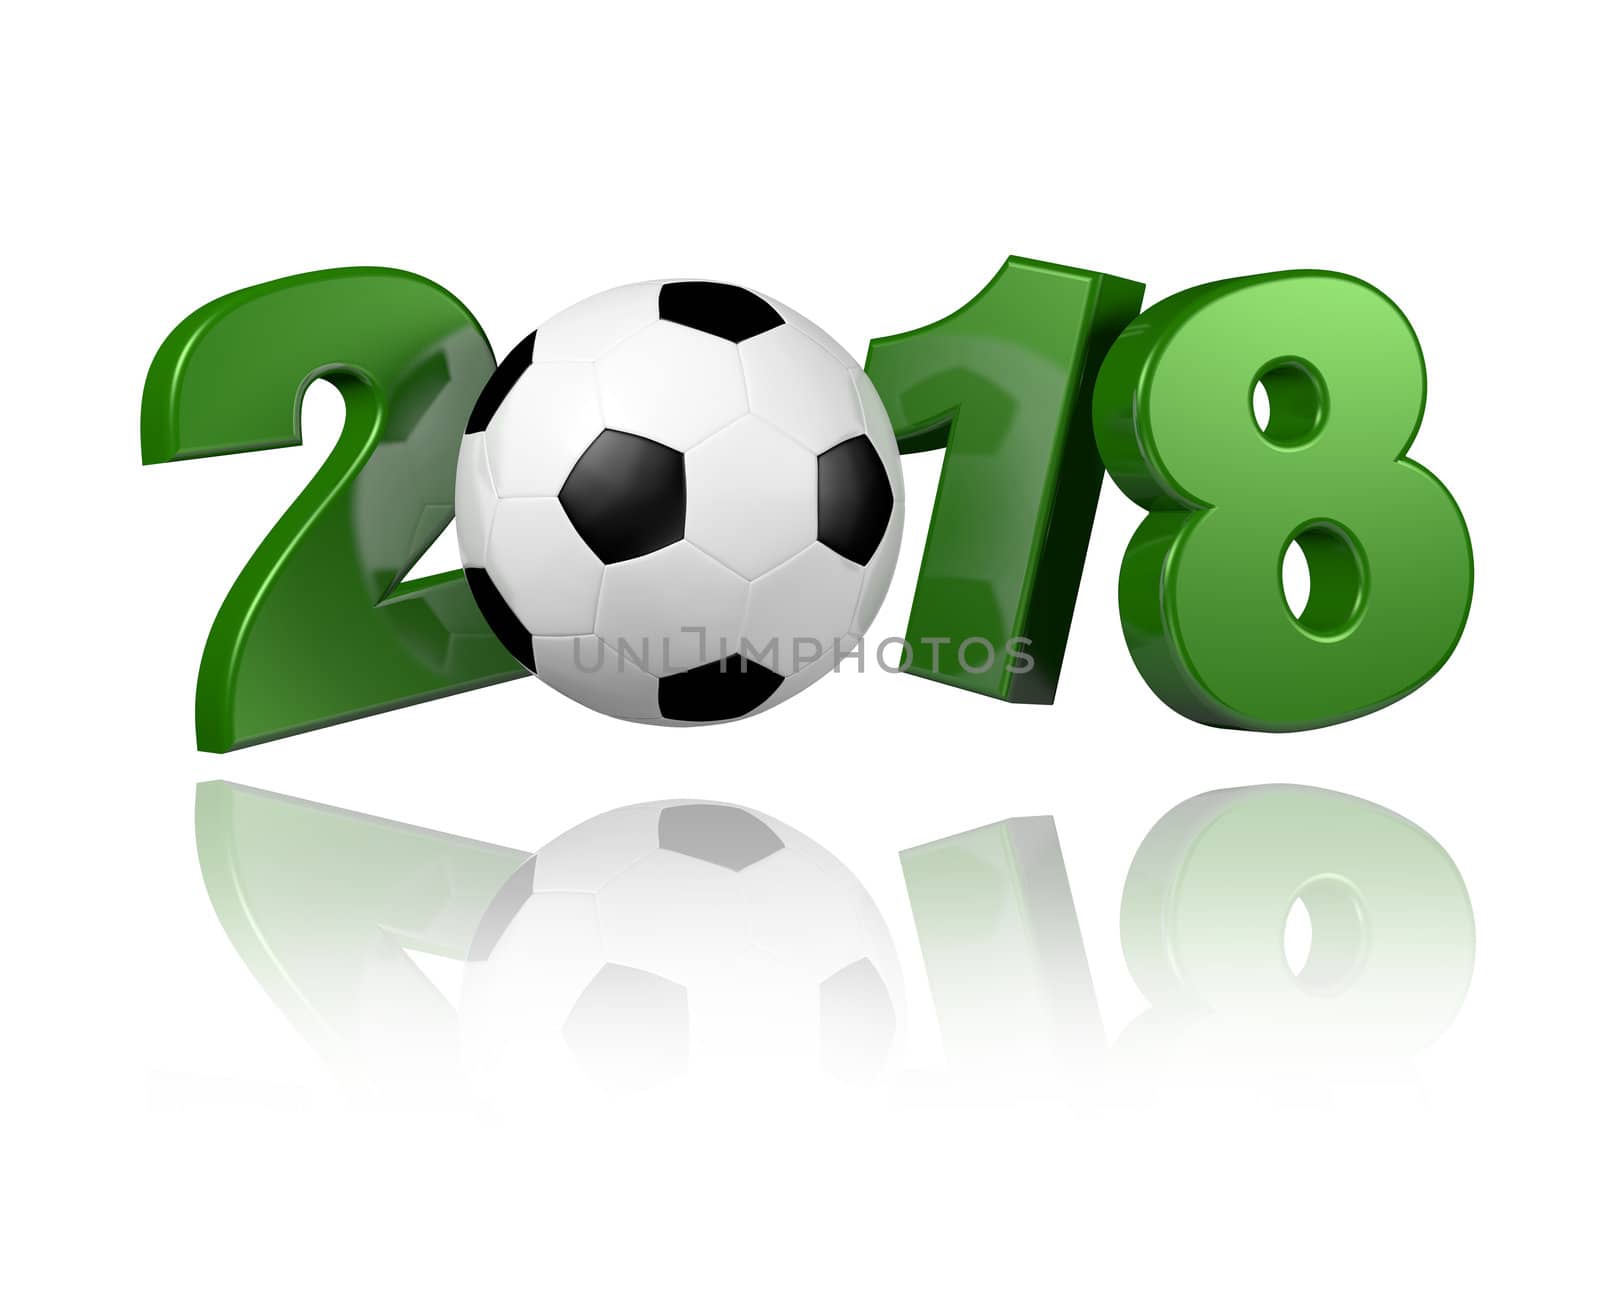 Football 2018 design with a white background